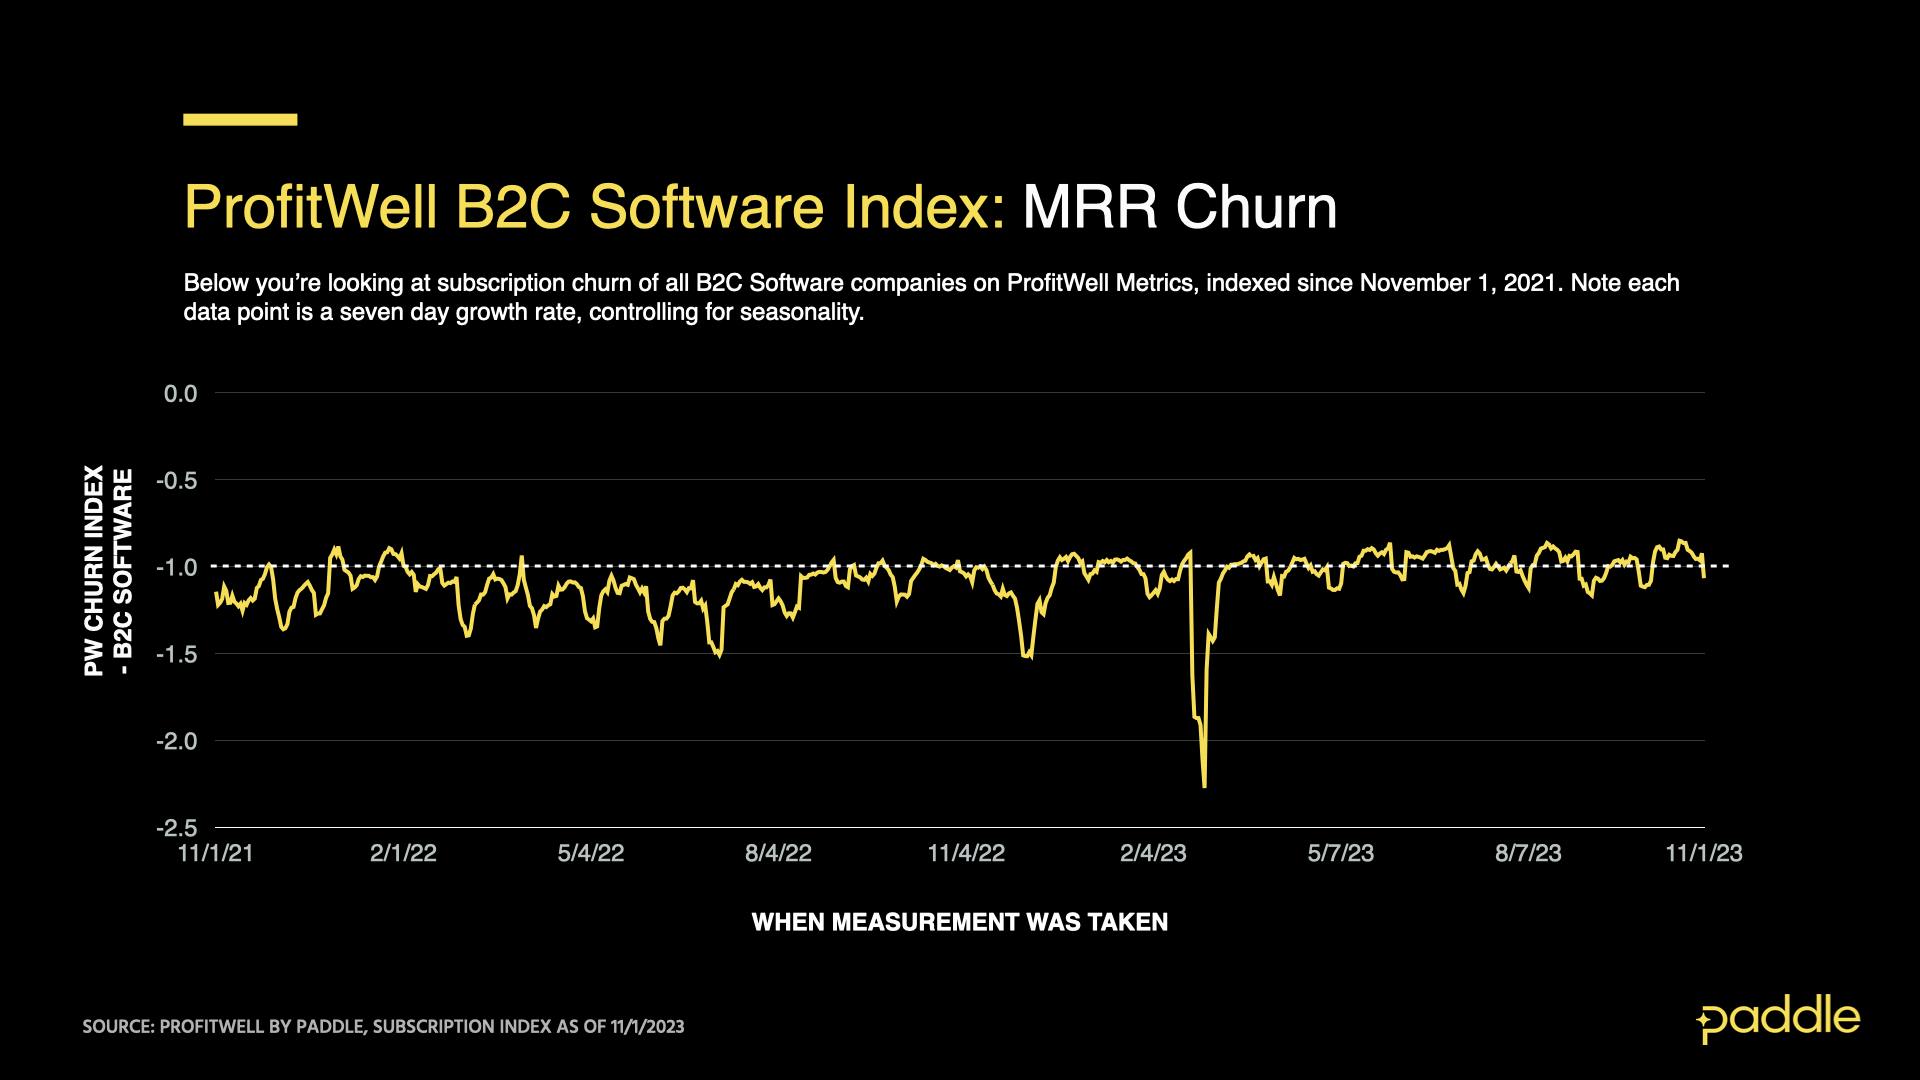 ProfitWell B2C Software Churn Index as of November 1, 2023 - MRR impact of churning customers